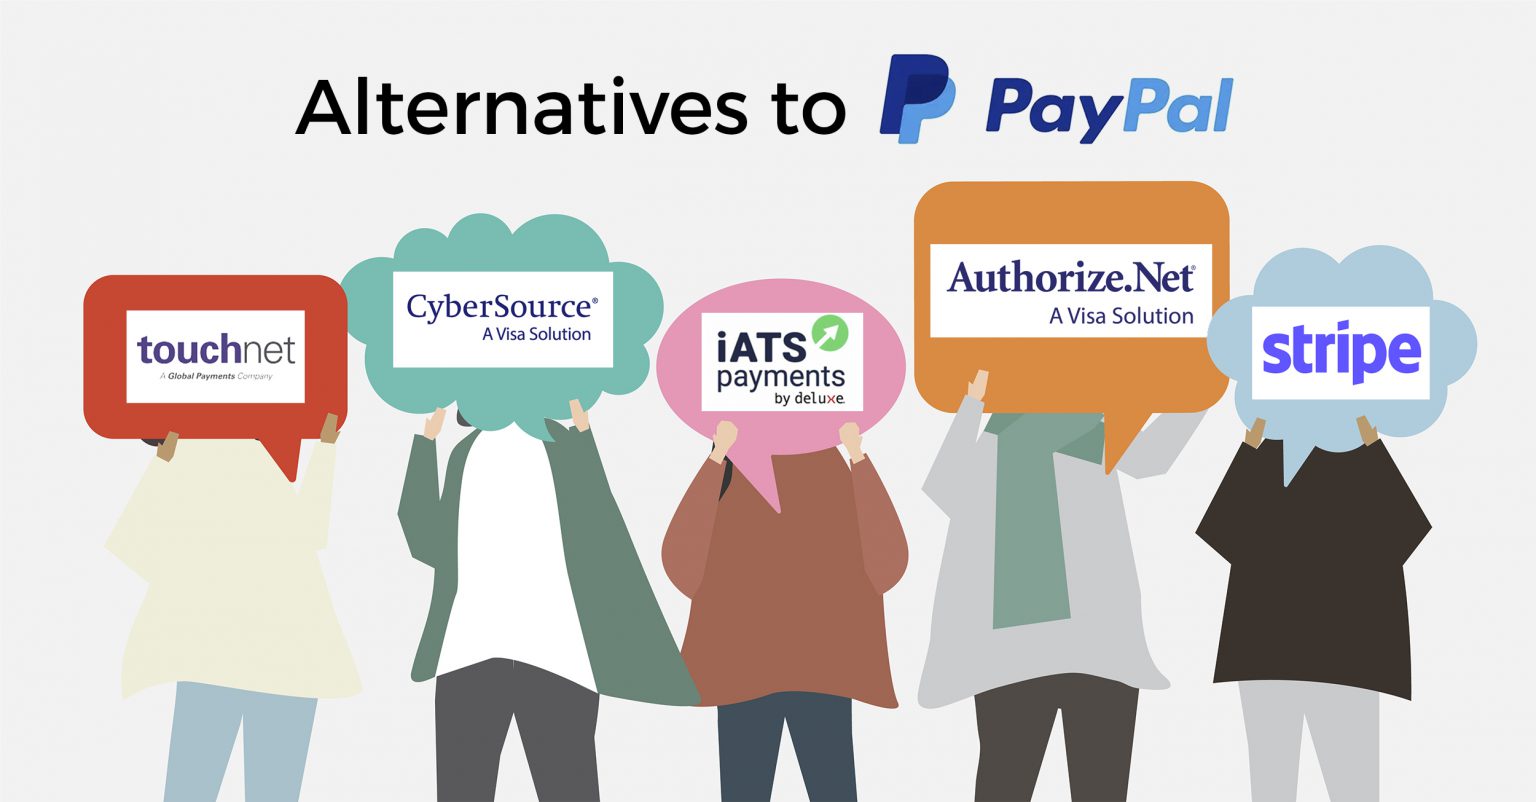 Alternatives to PayPal for Nonprofit Organizations